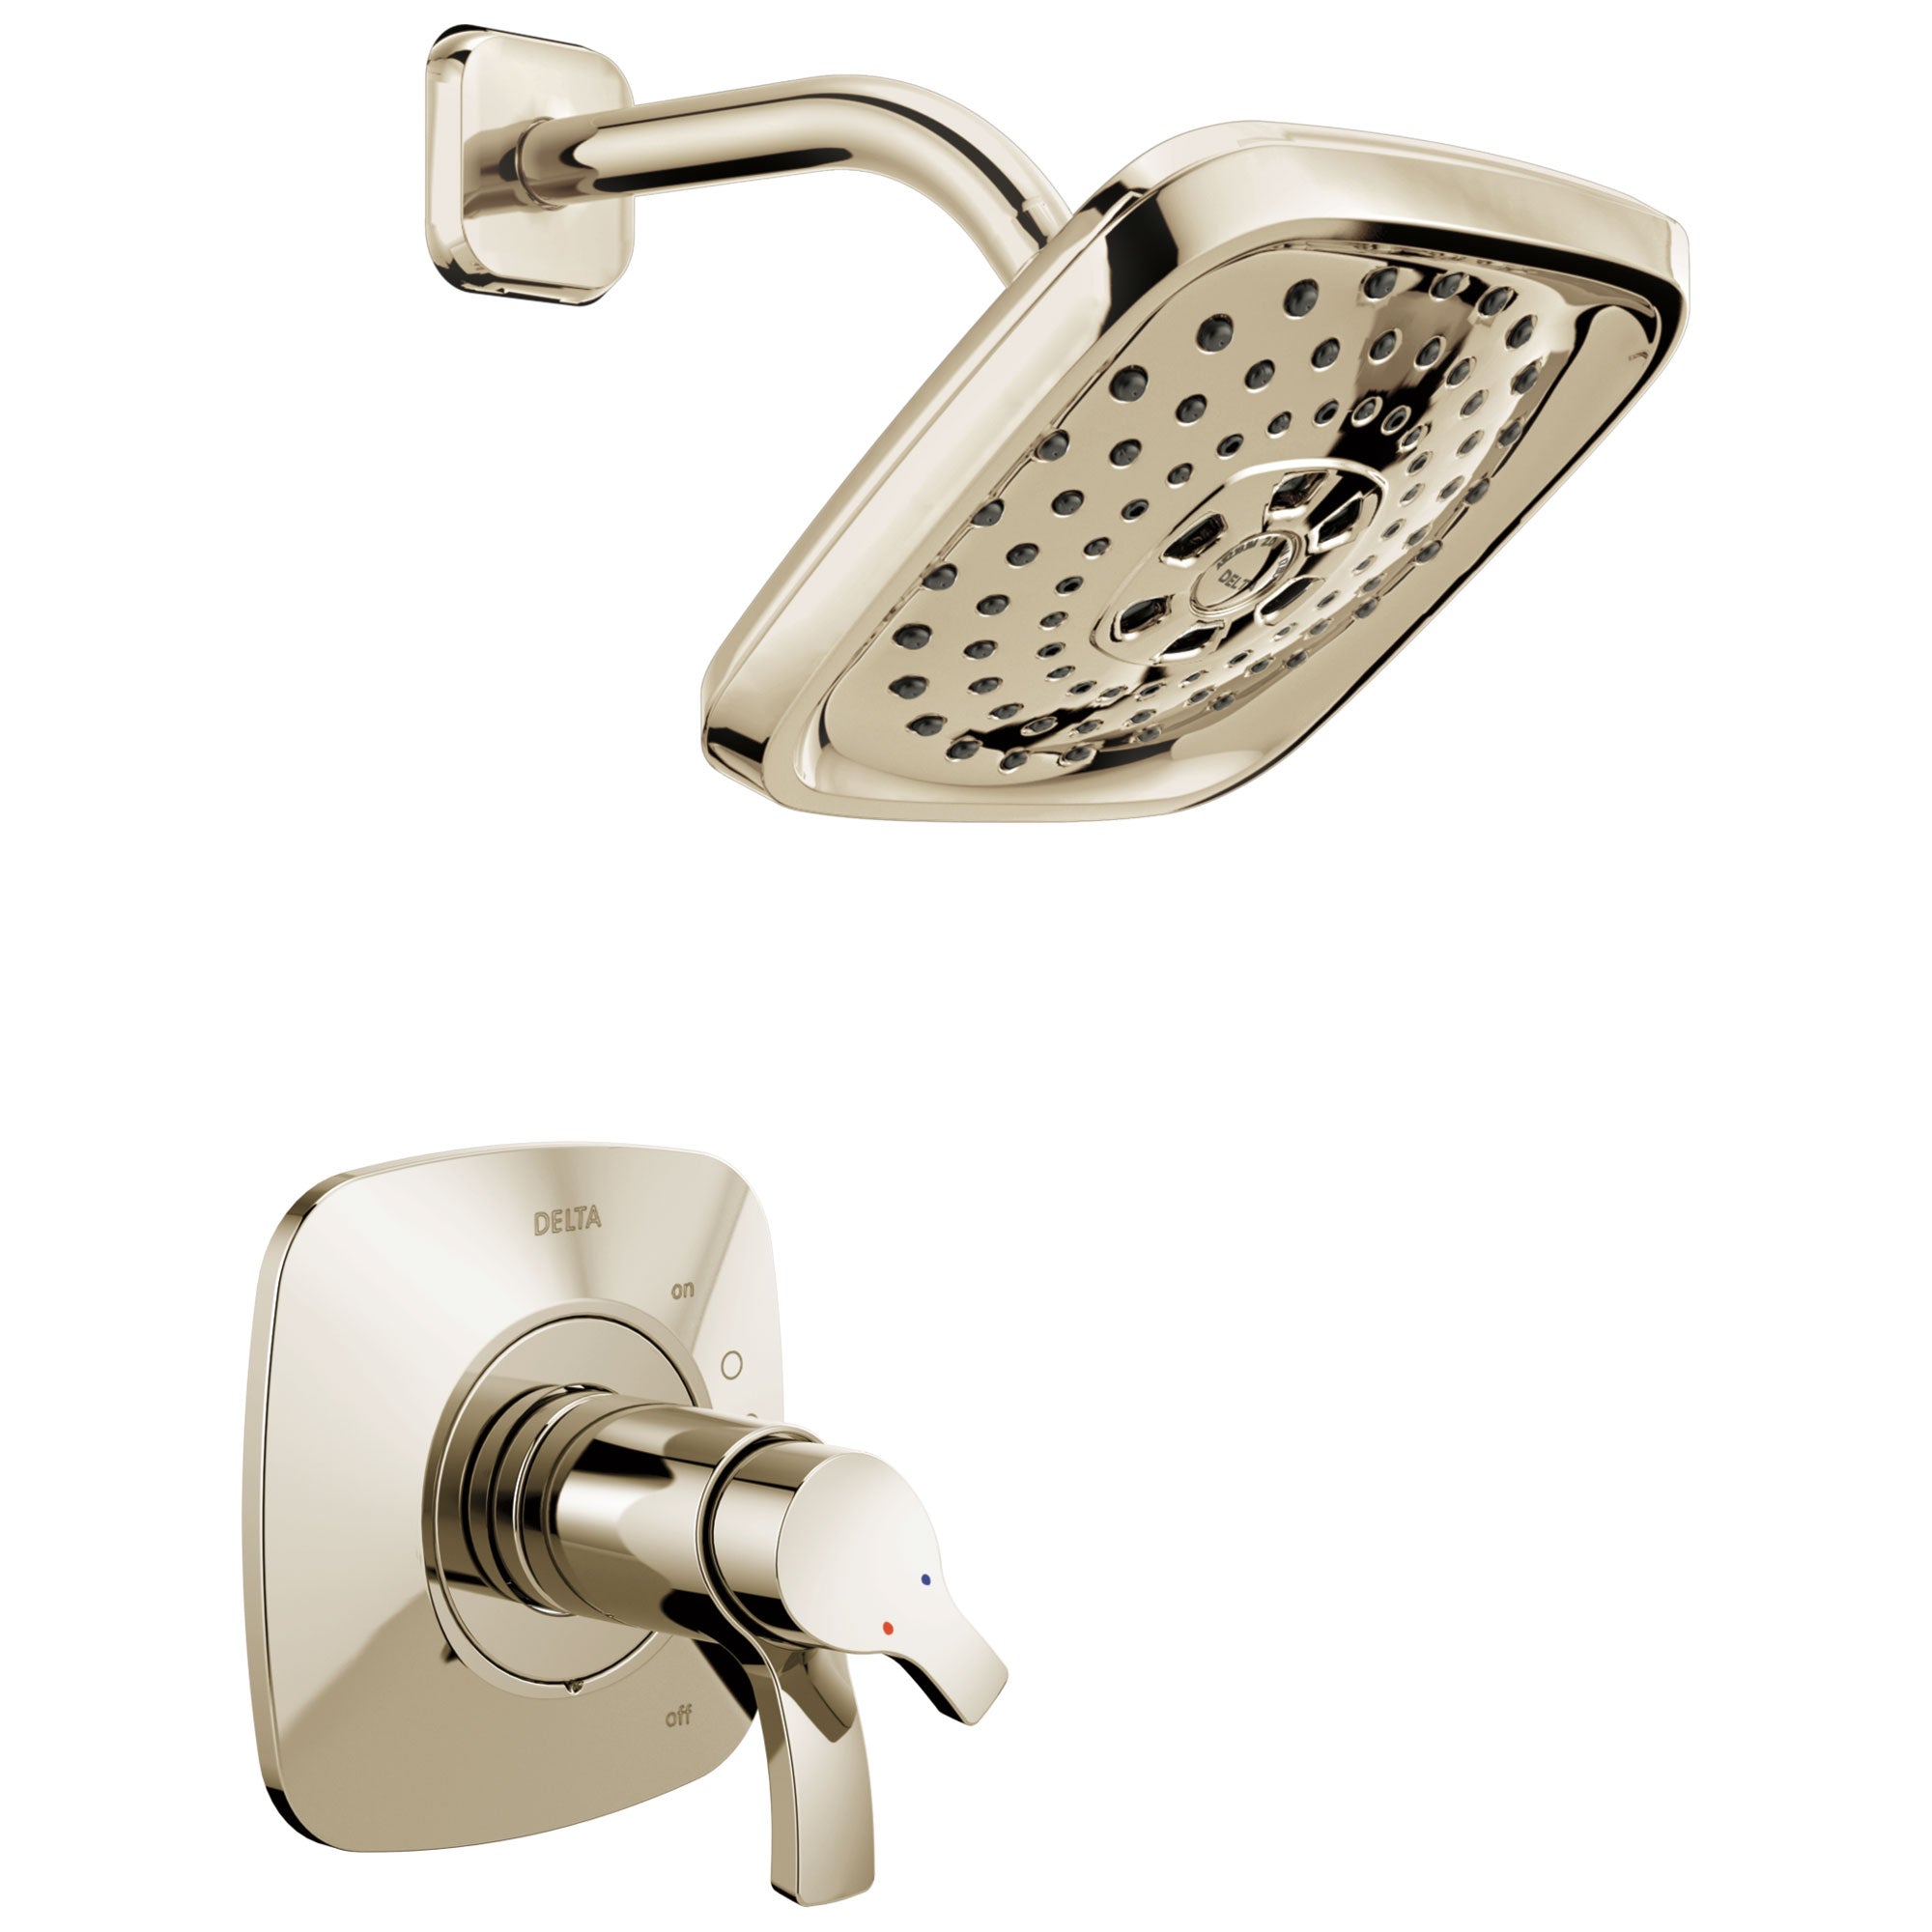 Delta Tesla H2Okinetic 1-Handle Shower Faucet in Polished Nickel Includes Rough-in Valve with Stops D2593V